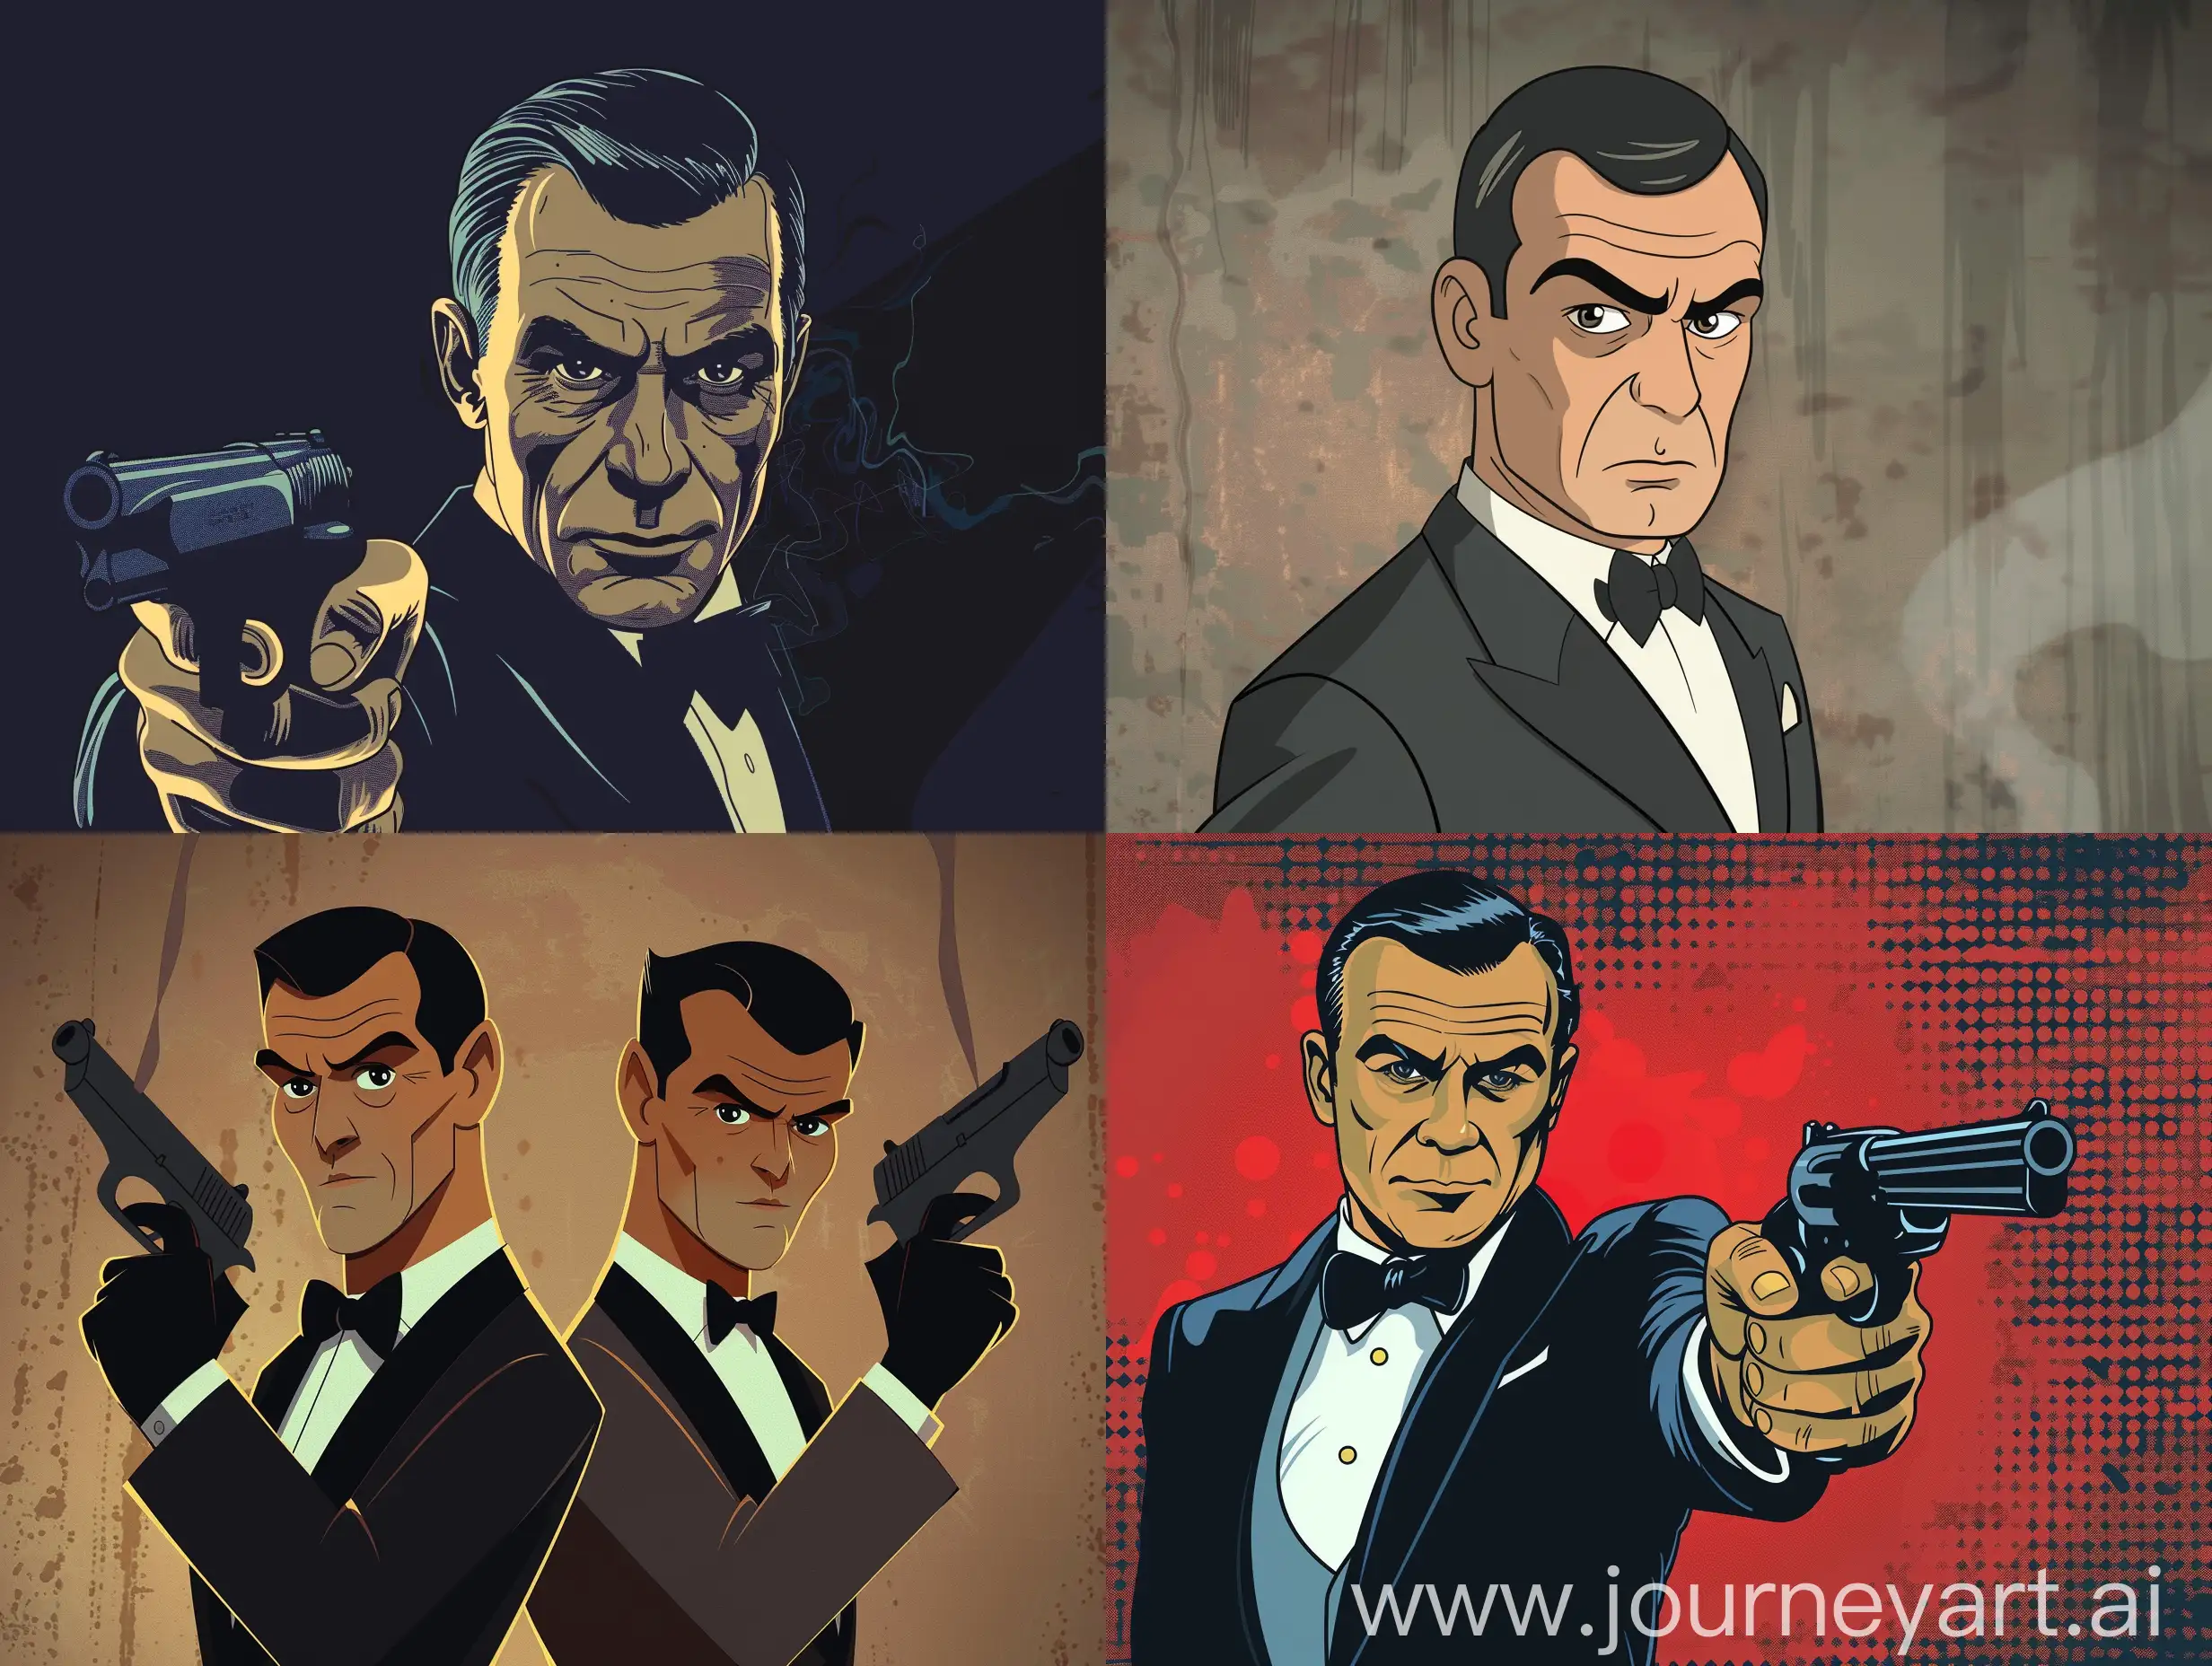 Simple 2d art of the 1960s Sean Connery version of James Bond done in the 2d art style of Batman The Animated Series